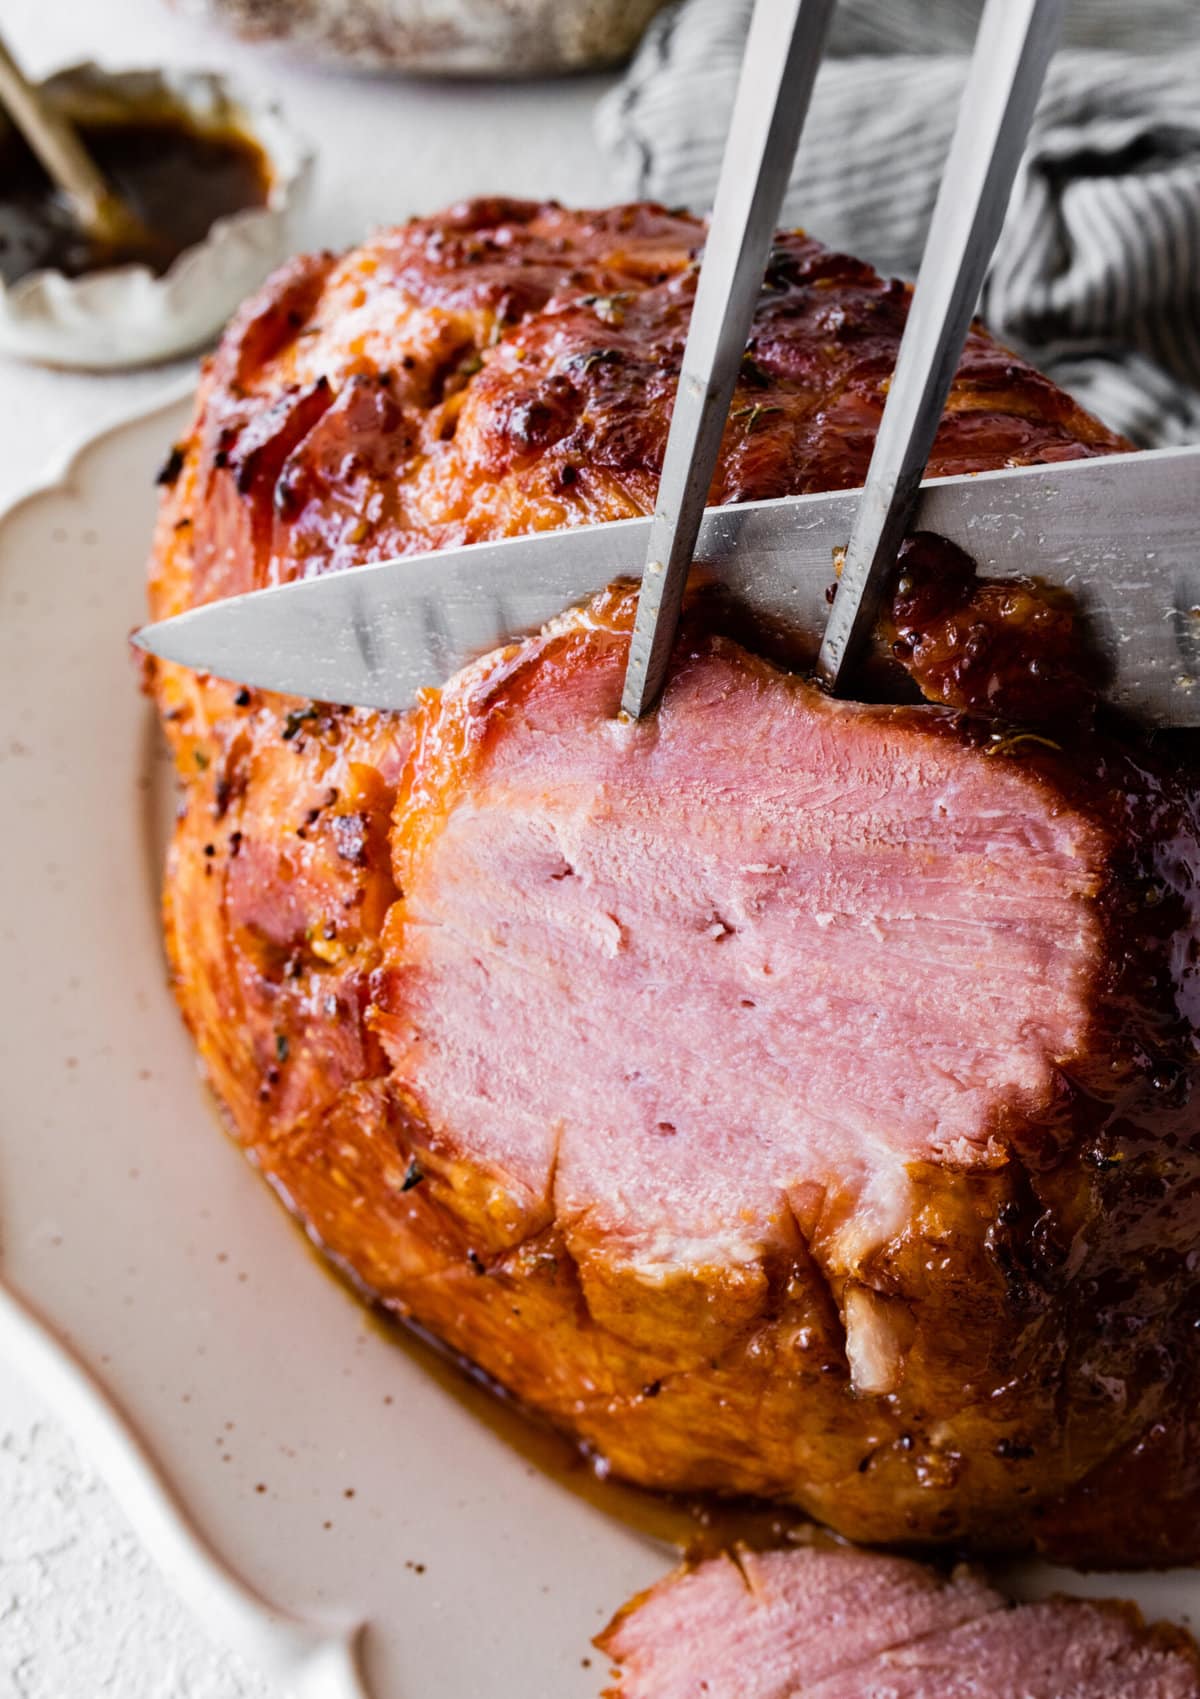 Perfectly baked ham with brown sugar glaze. Cutting the ham in slices with a sharp knife.